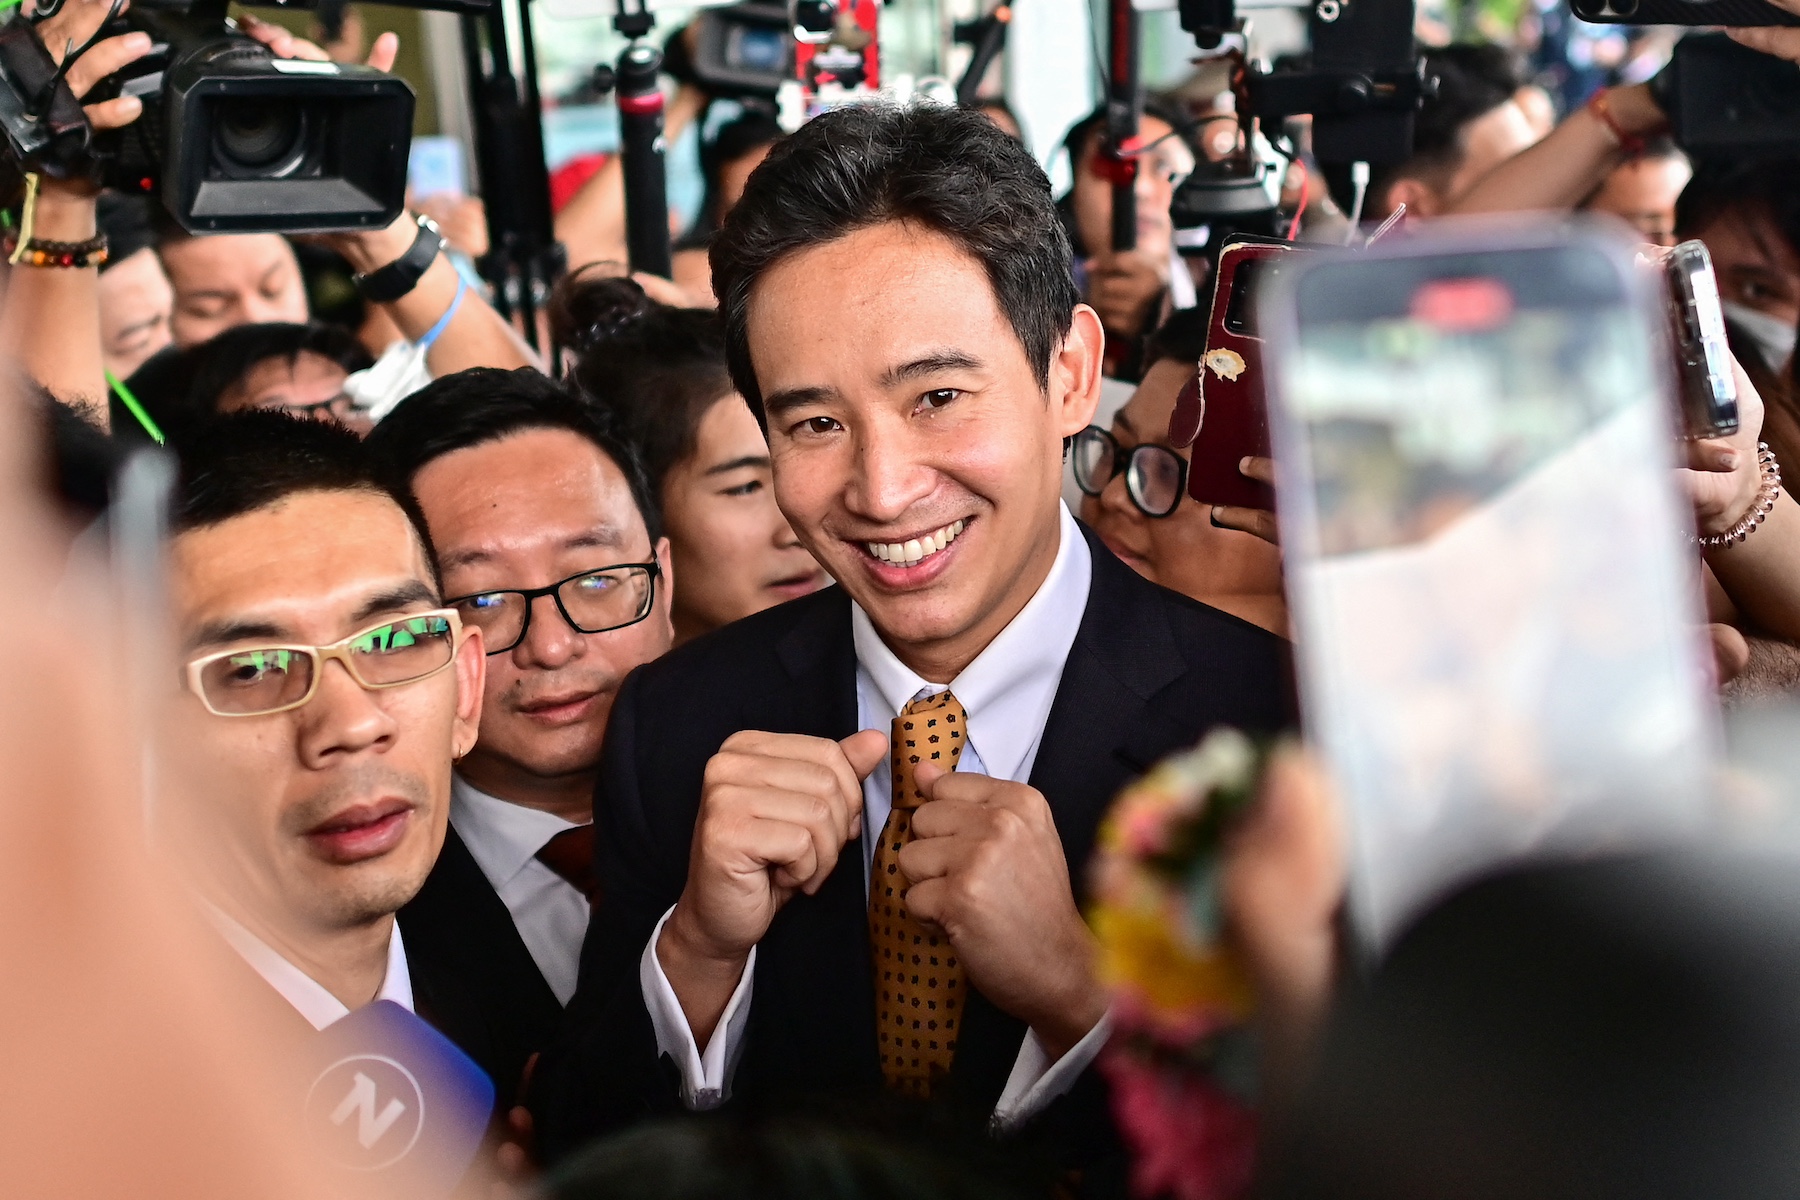 This Progressive Thai Opposition Politician Who Was Blocked From Being Prime Minister Has Been Found Not Guilty Of Violating Election Laws